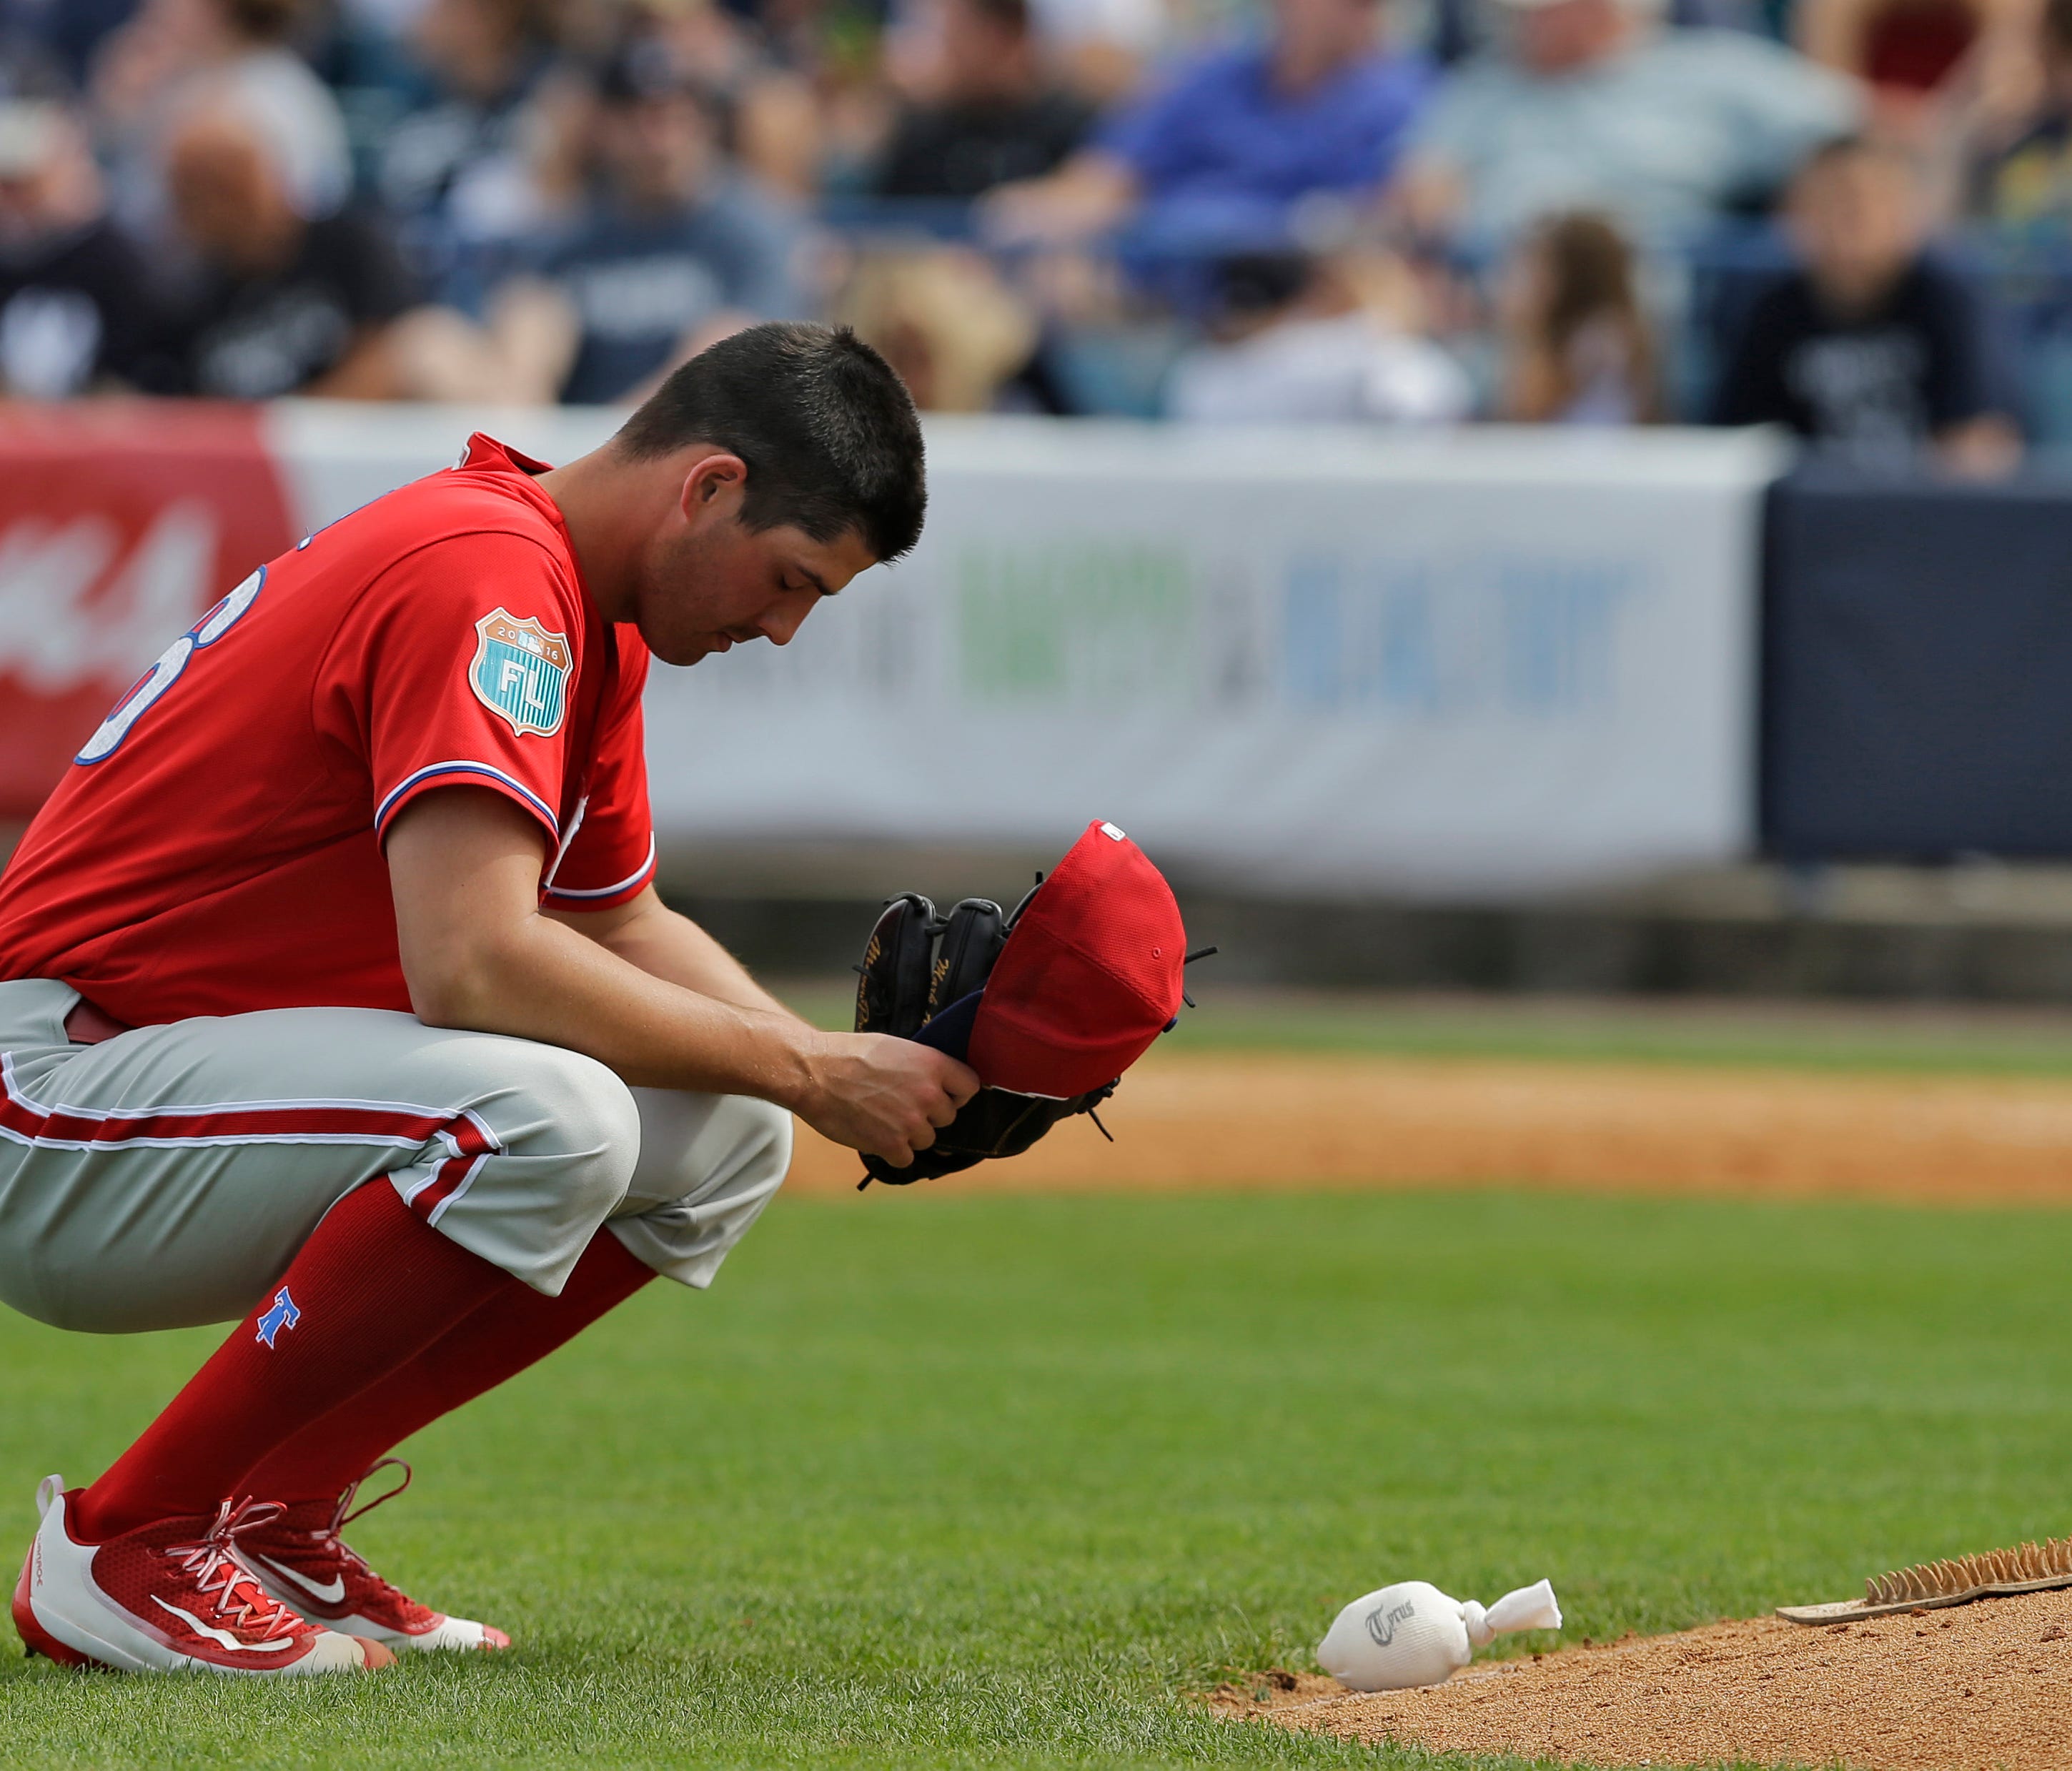 Mark Appel says a brief prayer before facing the New York Yankees during a 2016 spring training game.